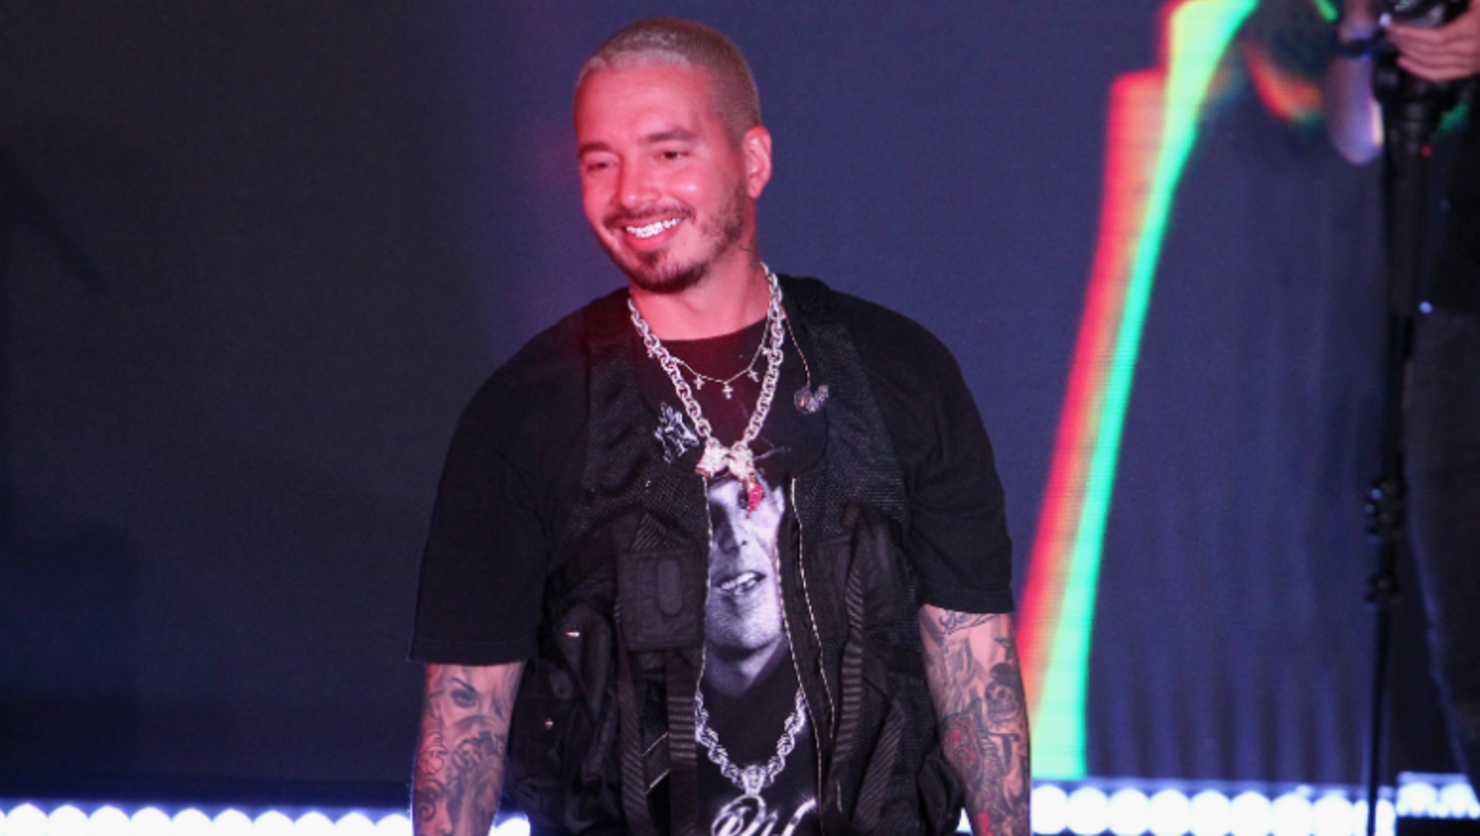 GUESS Partners with J Balvin to Launch GUESS Vibras